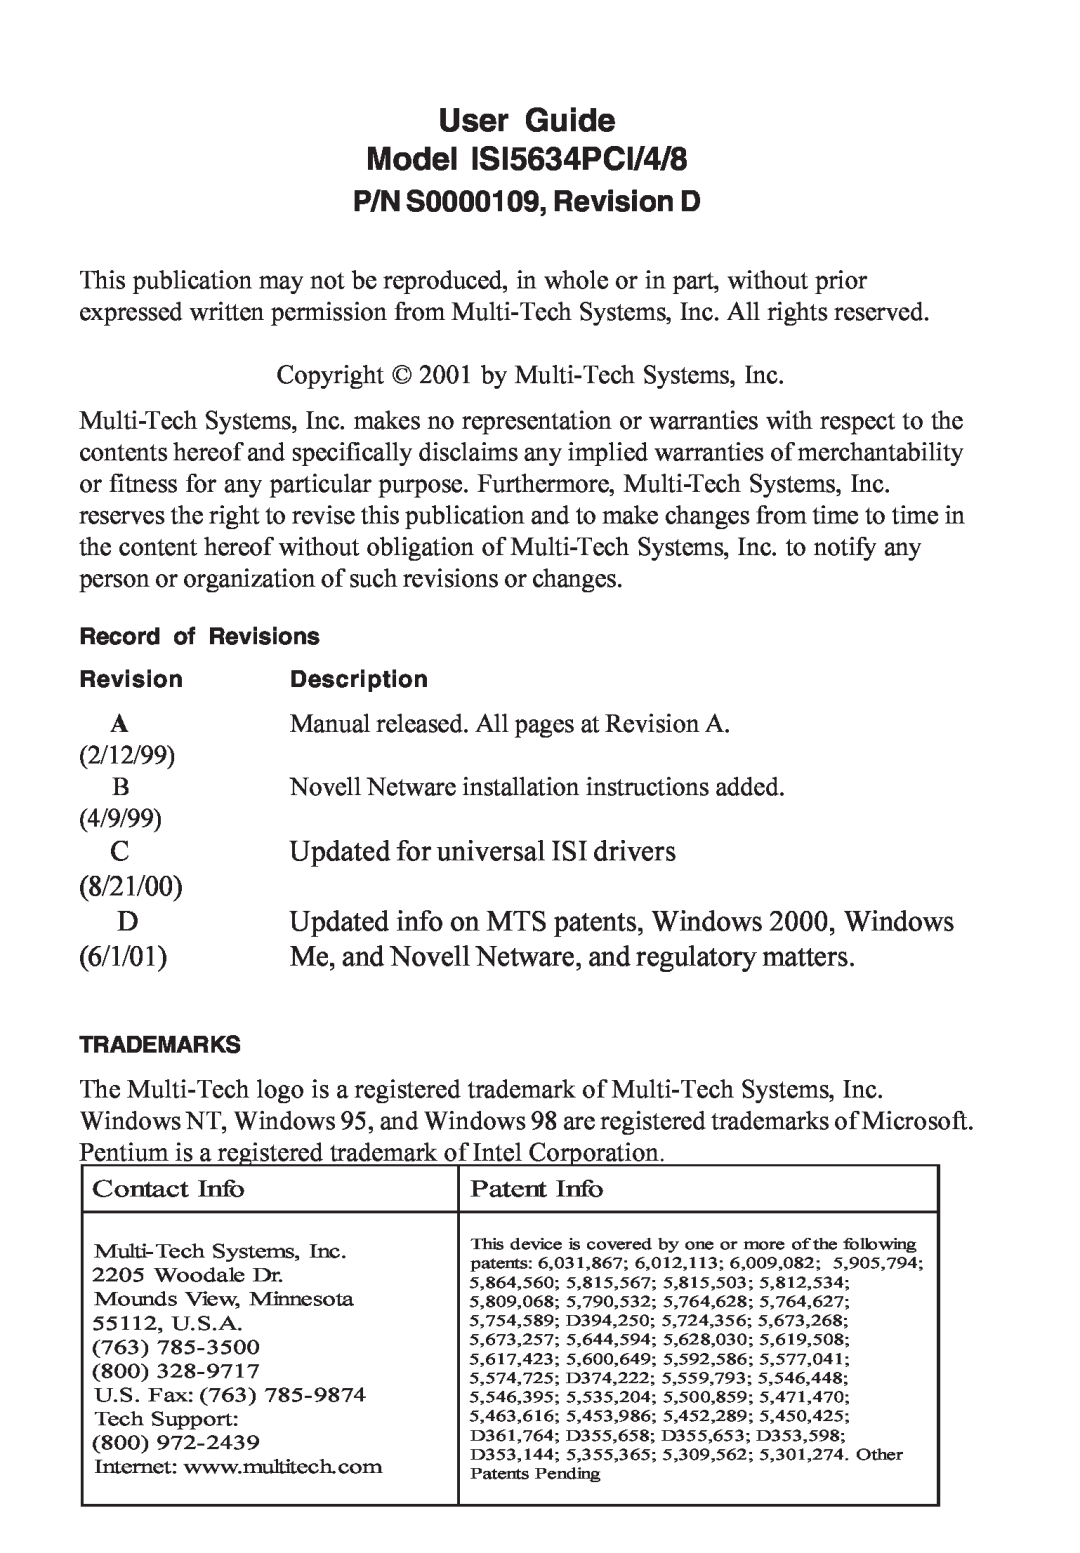 Multi-Tech Systems User Guide Model ISI5634PCI/4/8, P/N S0000109, Revision D, Record of Revisions Revision Description 